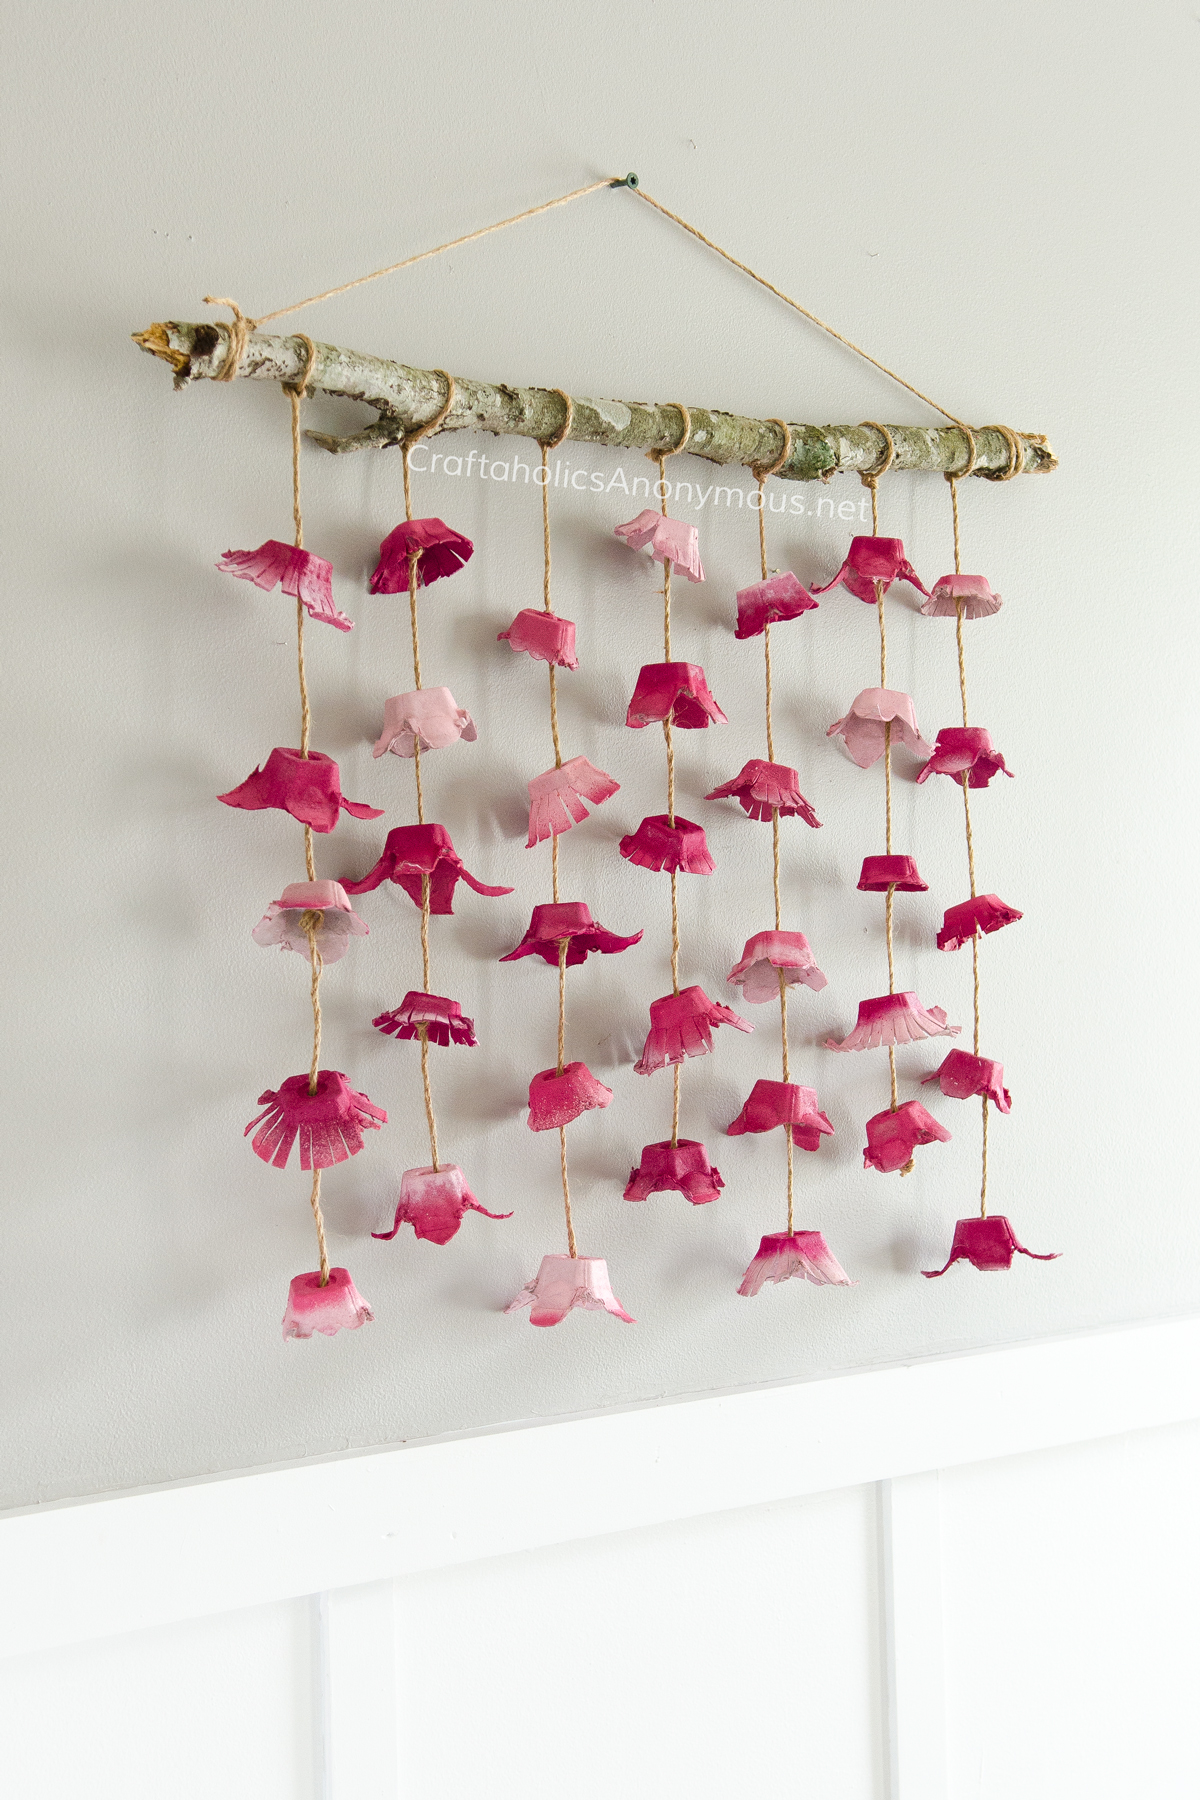 Craftaholics Anonymous® | Boho Flower Wall Hanging made from Egg Cartons